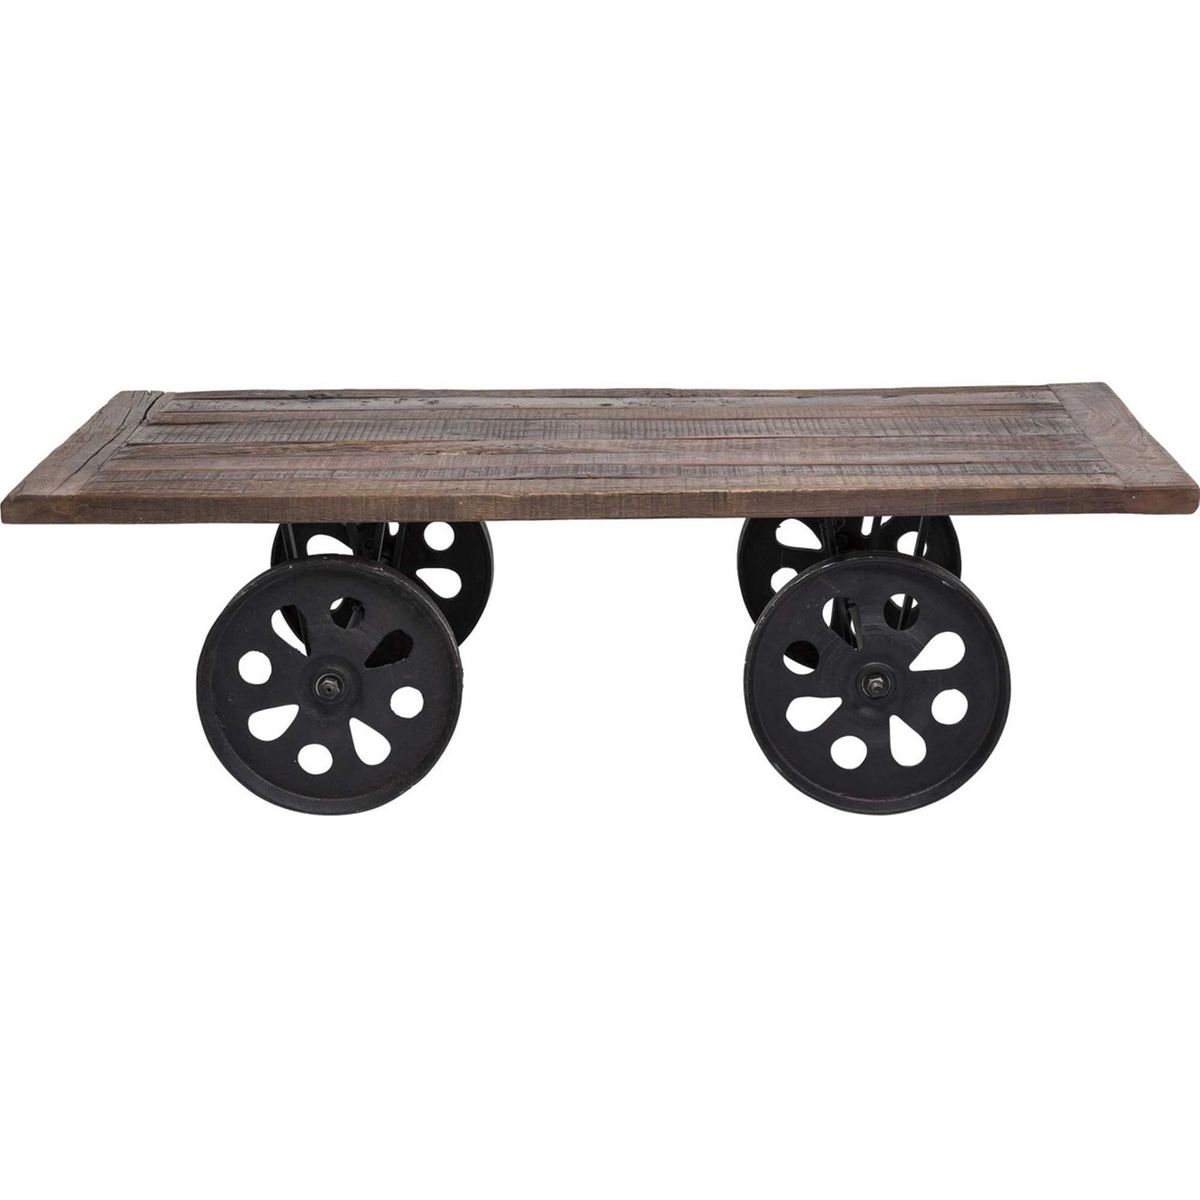 Soldes Table basse La Redoute, Table basse a roulettes Manor House Kare Design